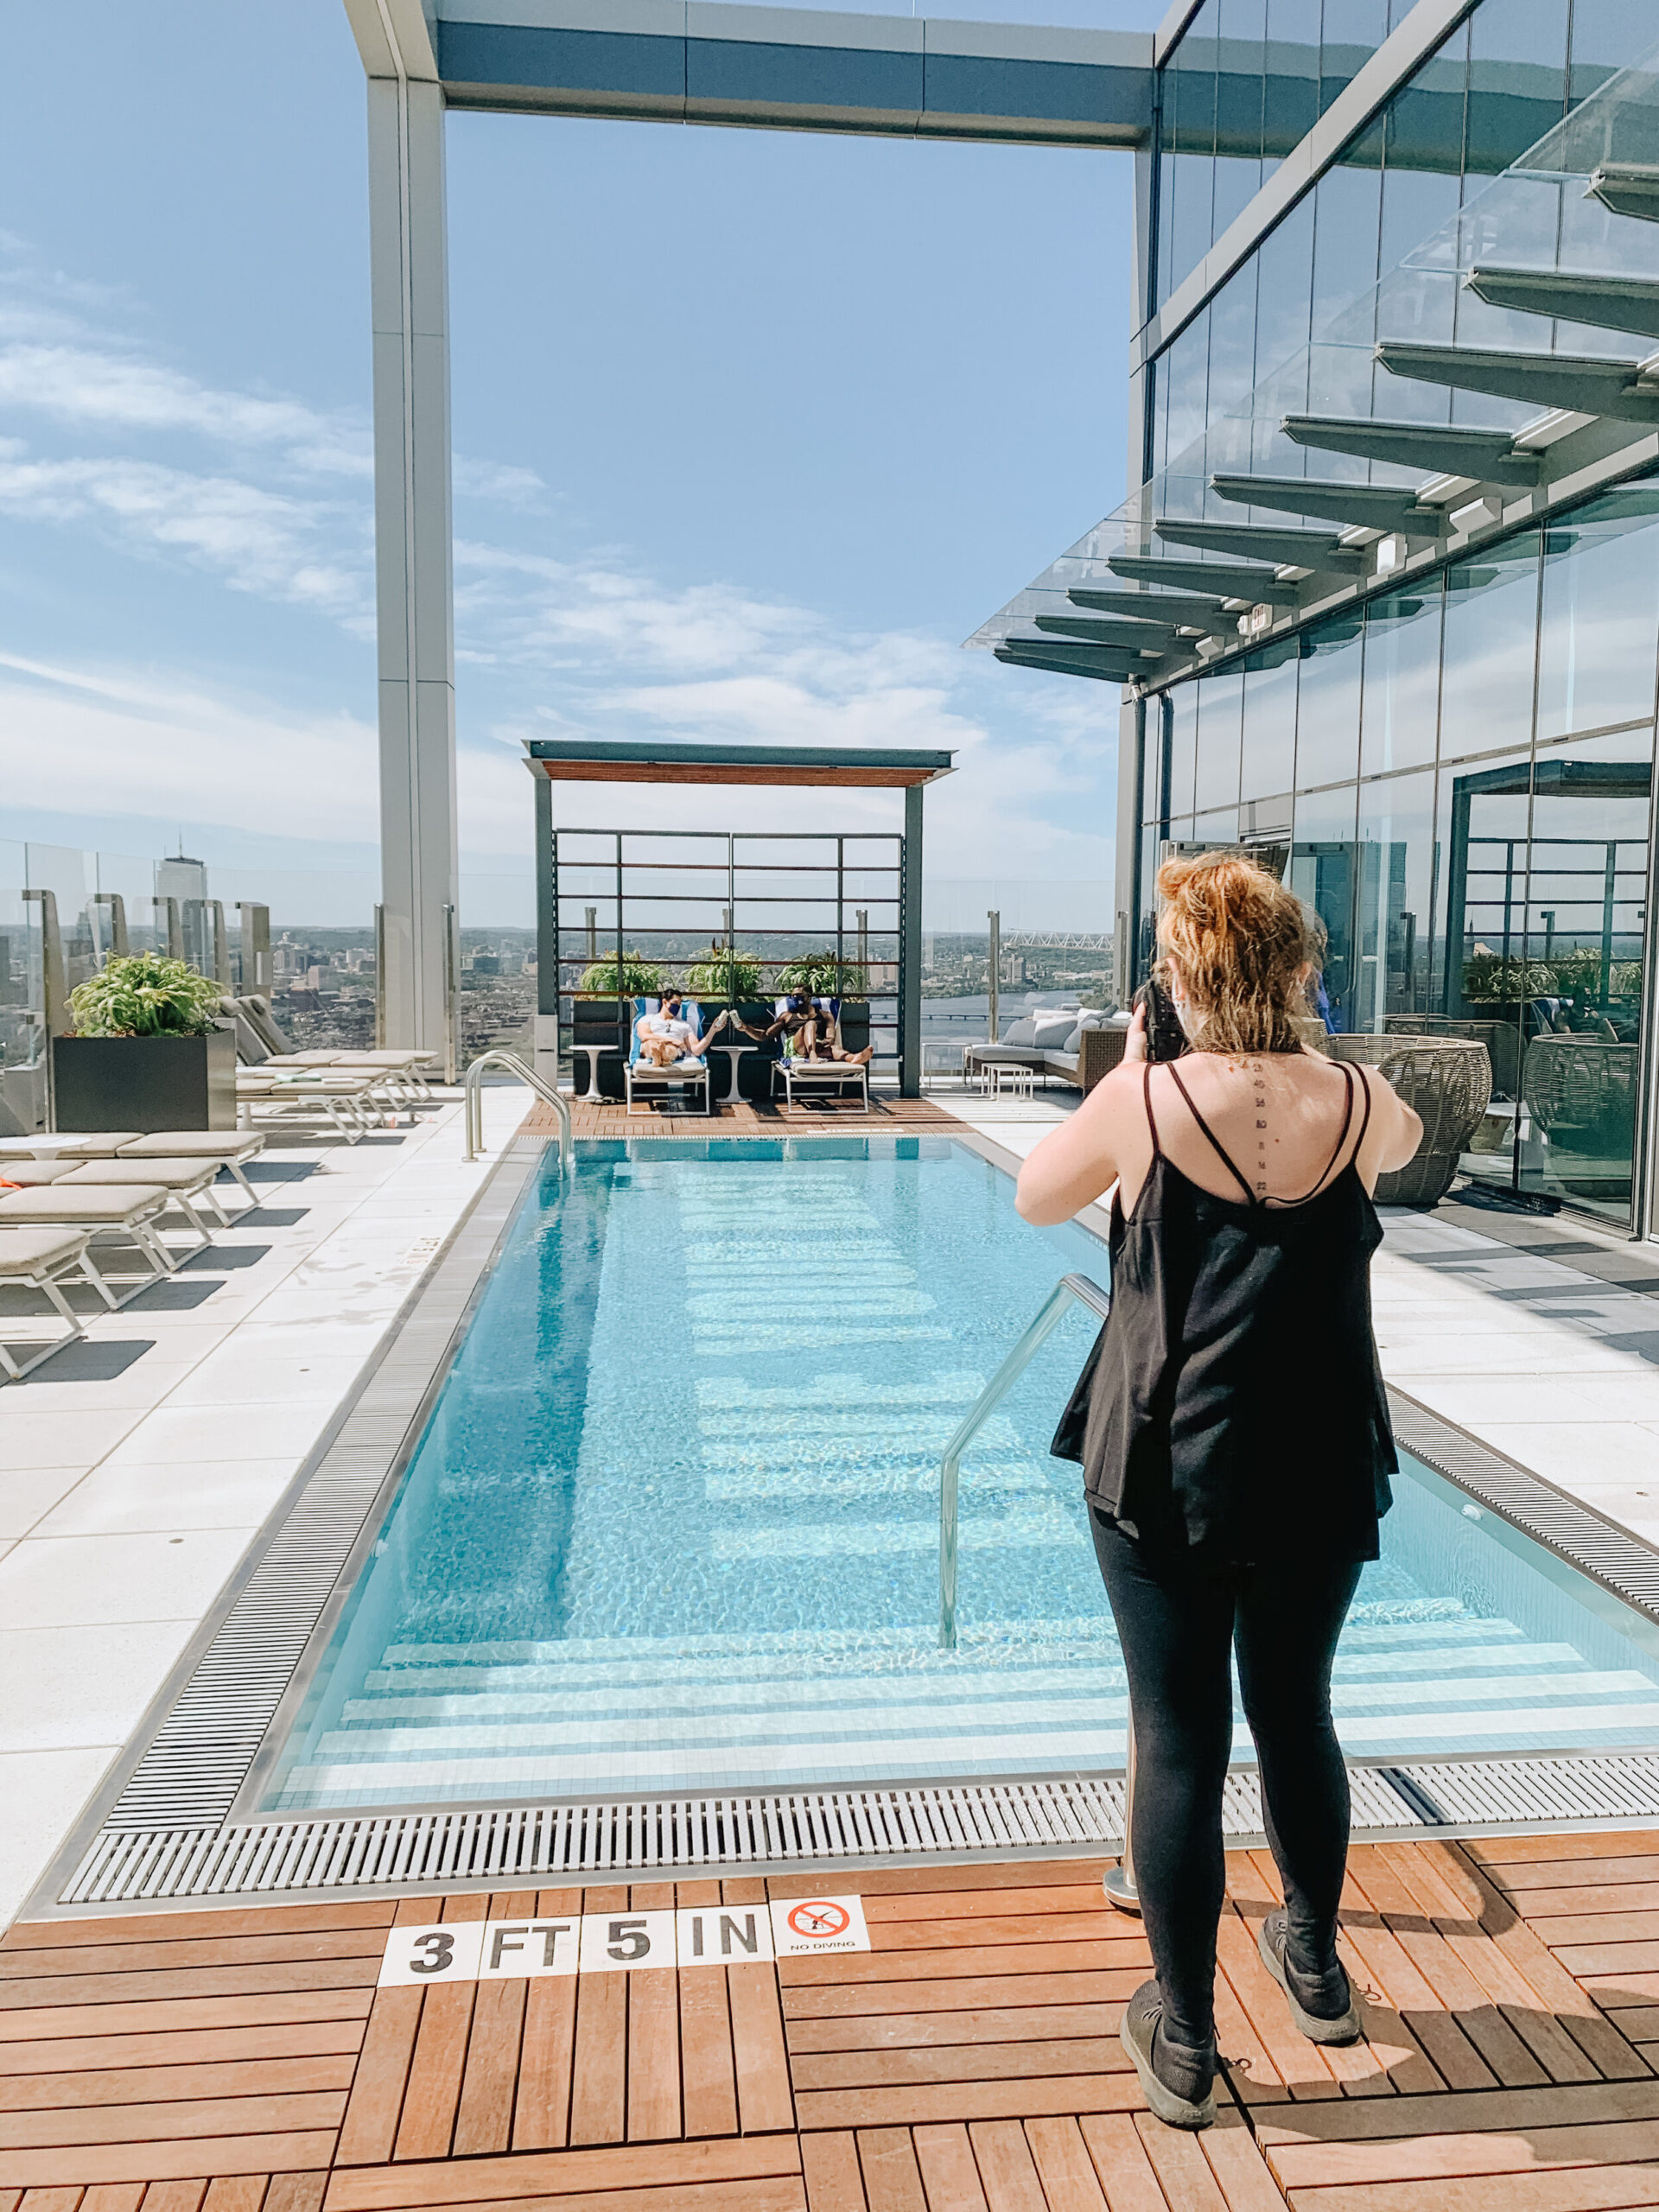 Shooting at the highest rooftop pool in Boston - Hub50House! I love luxury real estate lifestyle shoots.